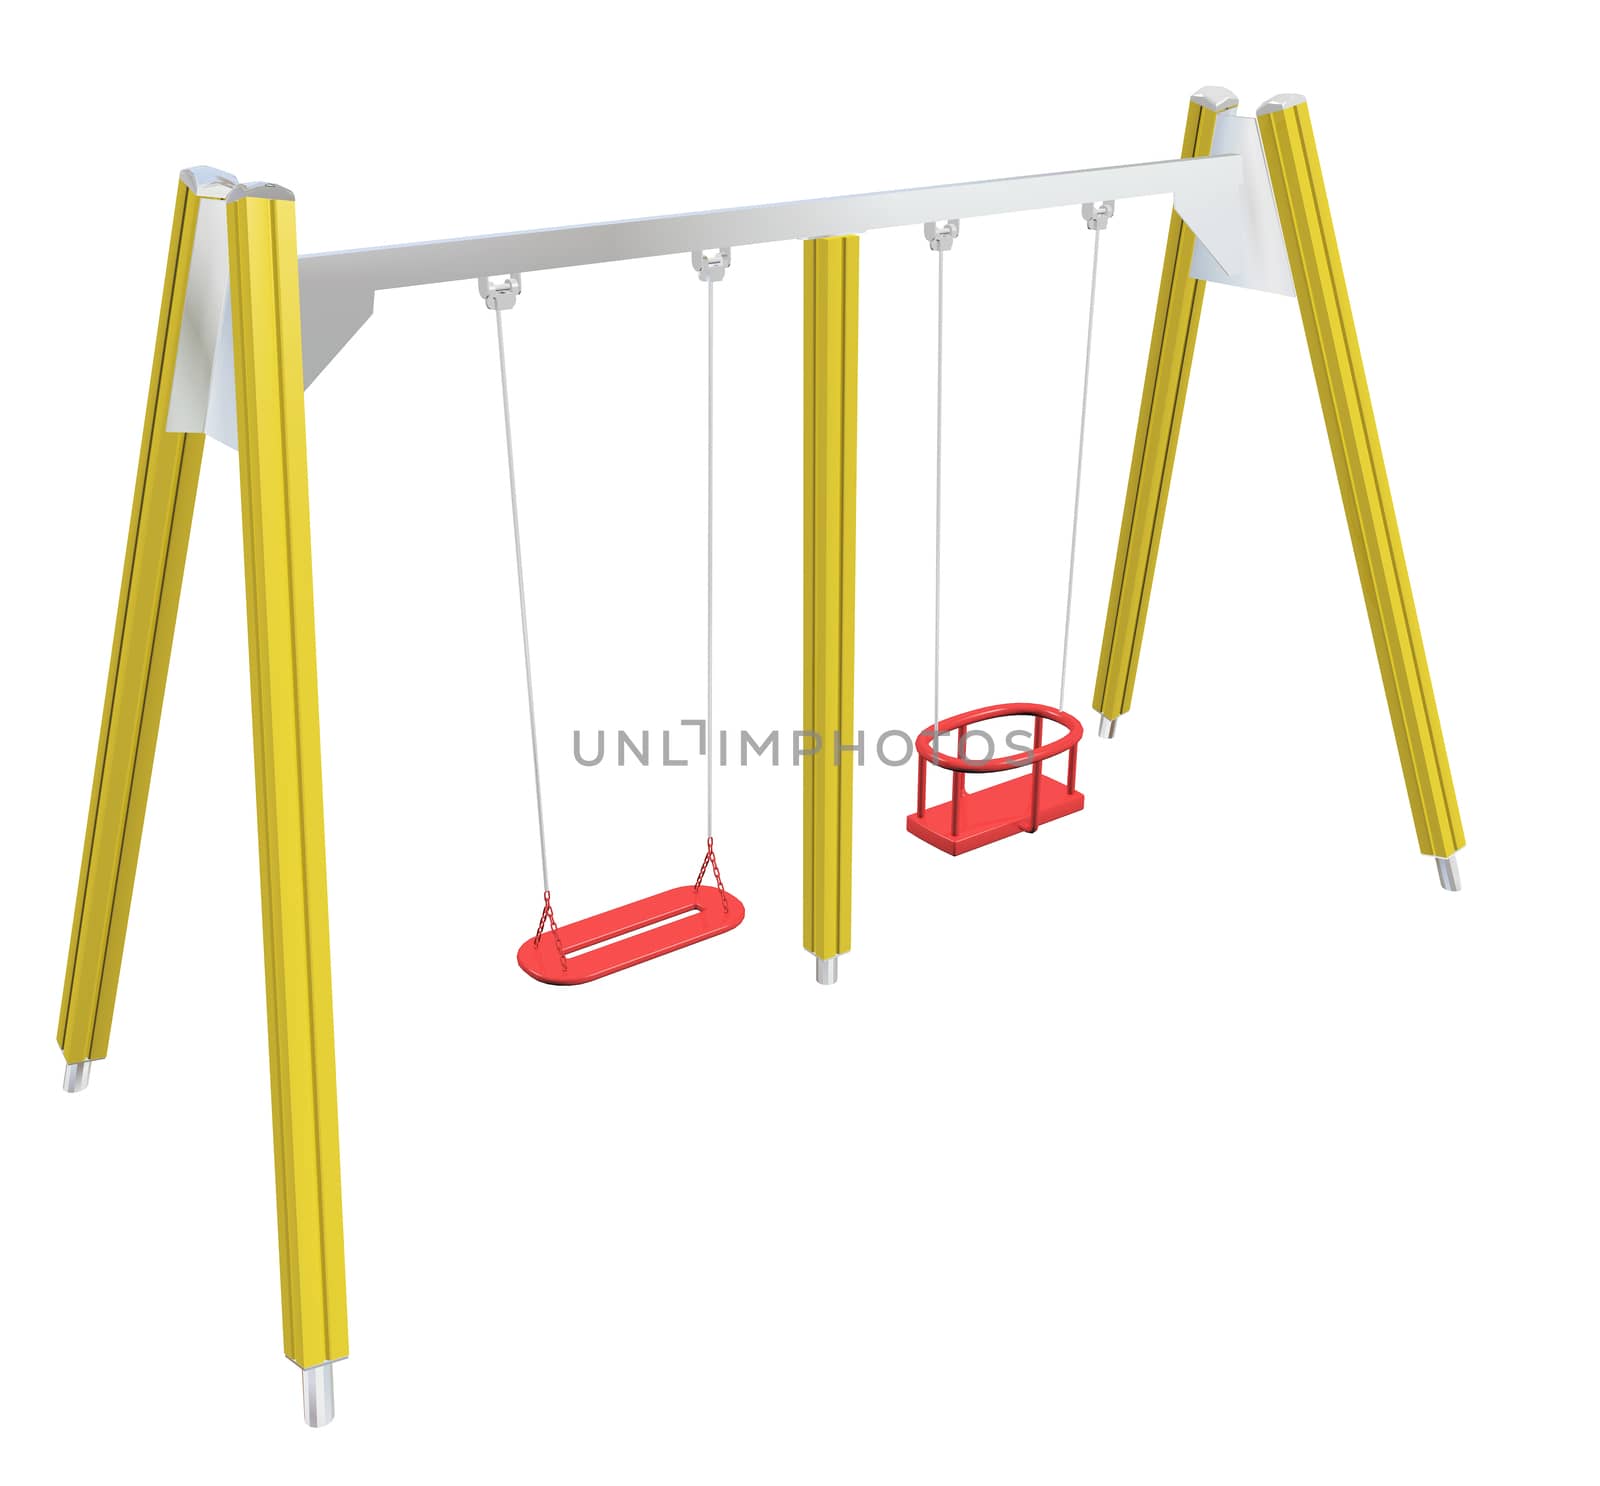 Child-safe swing, yellow and red,  3D illustration, isolated against a white background.